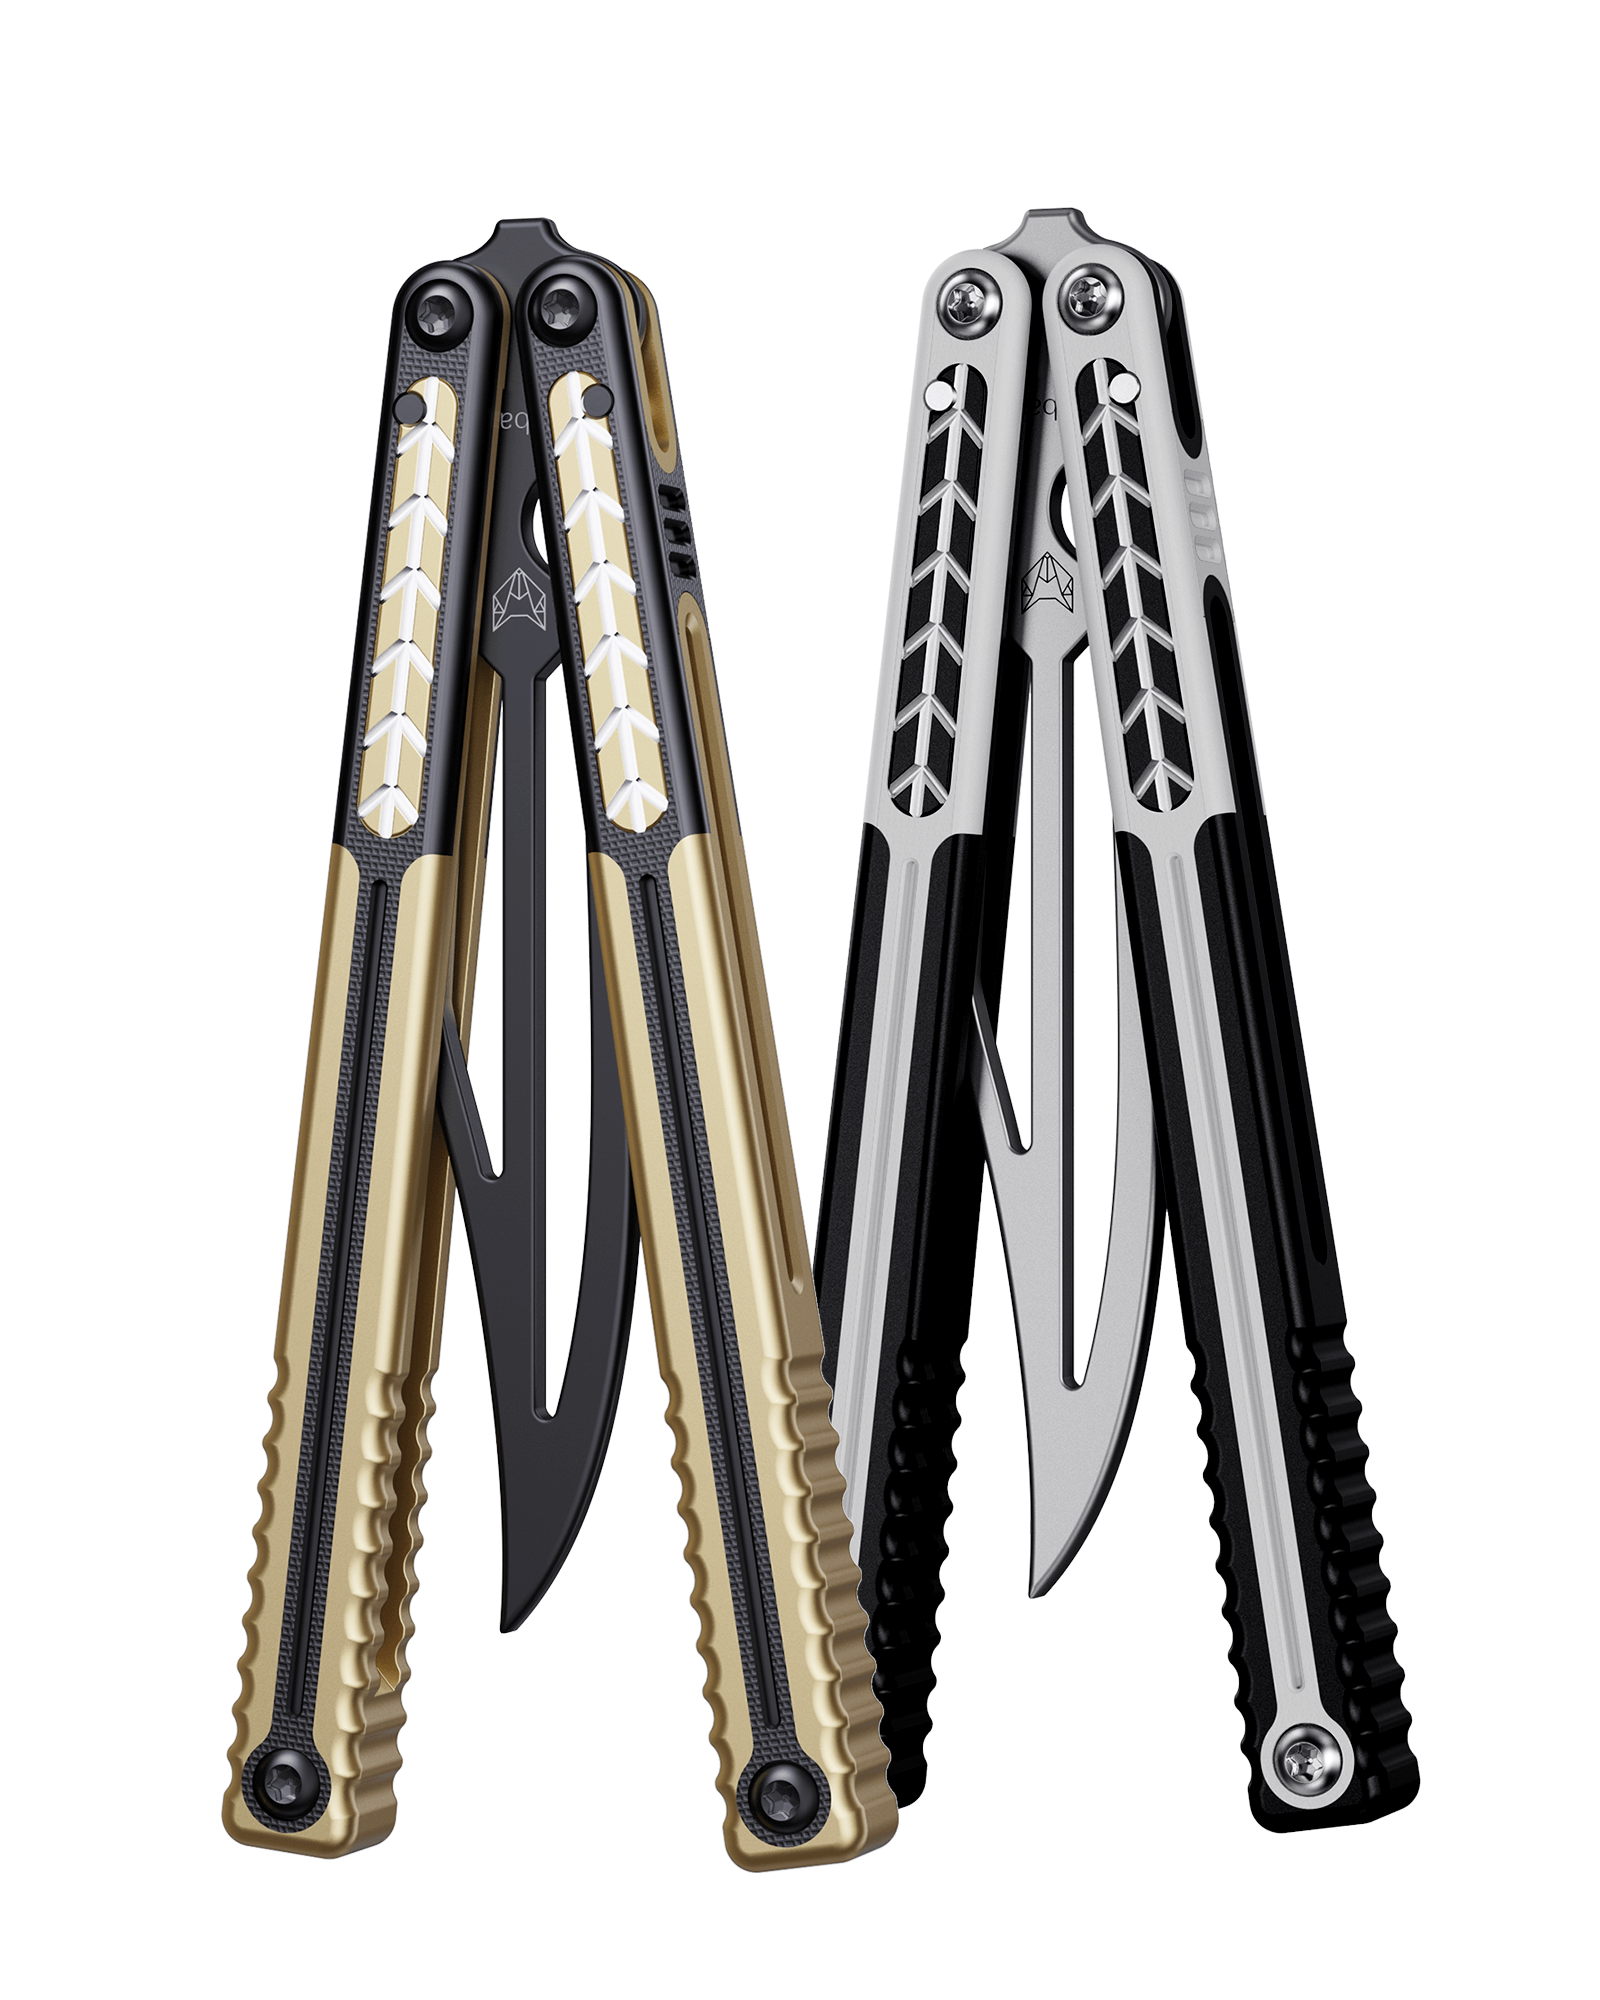 Nabalis Vulp Pro Balisong Butterfly Knife Trainer-Gold and balck-closed